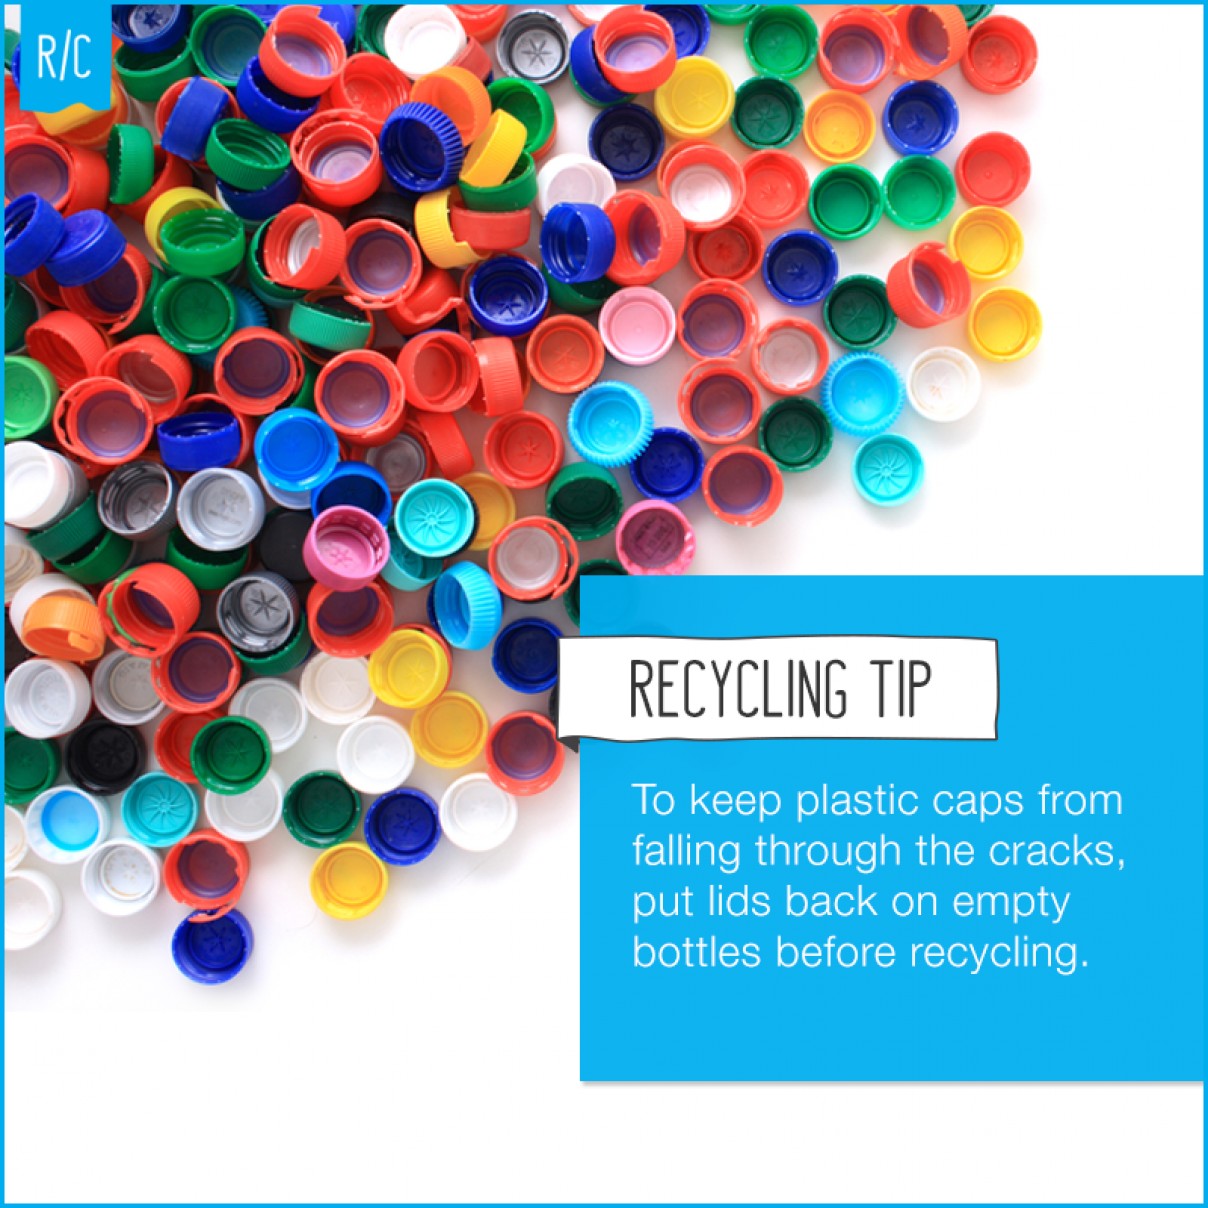 Recycling plastic bottles - Caps on or off?